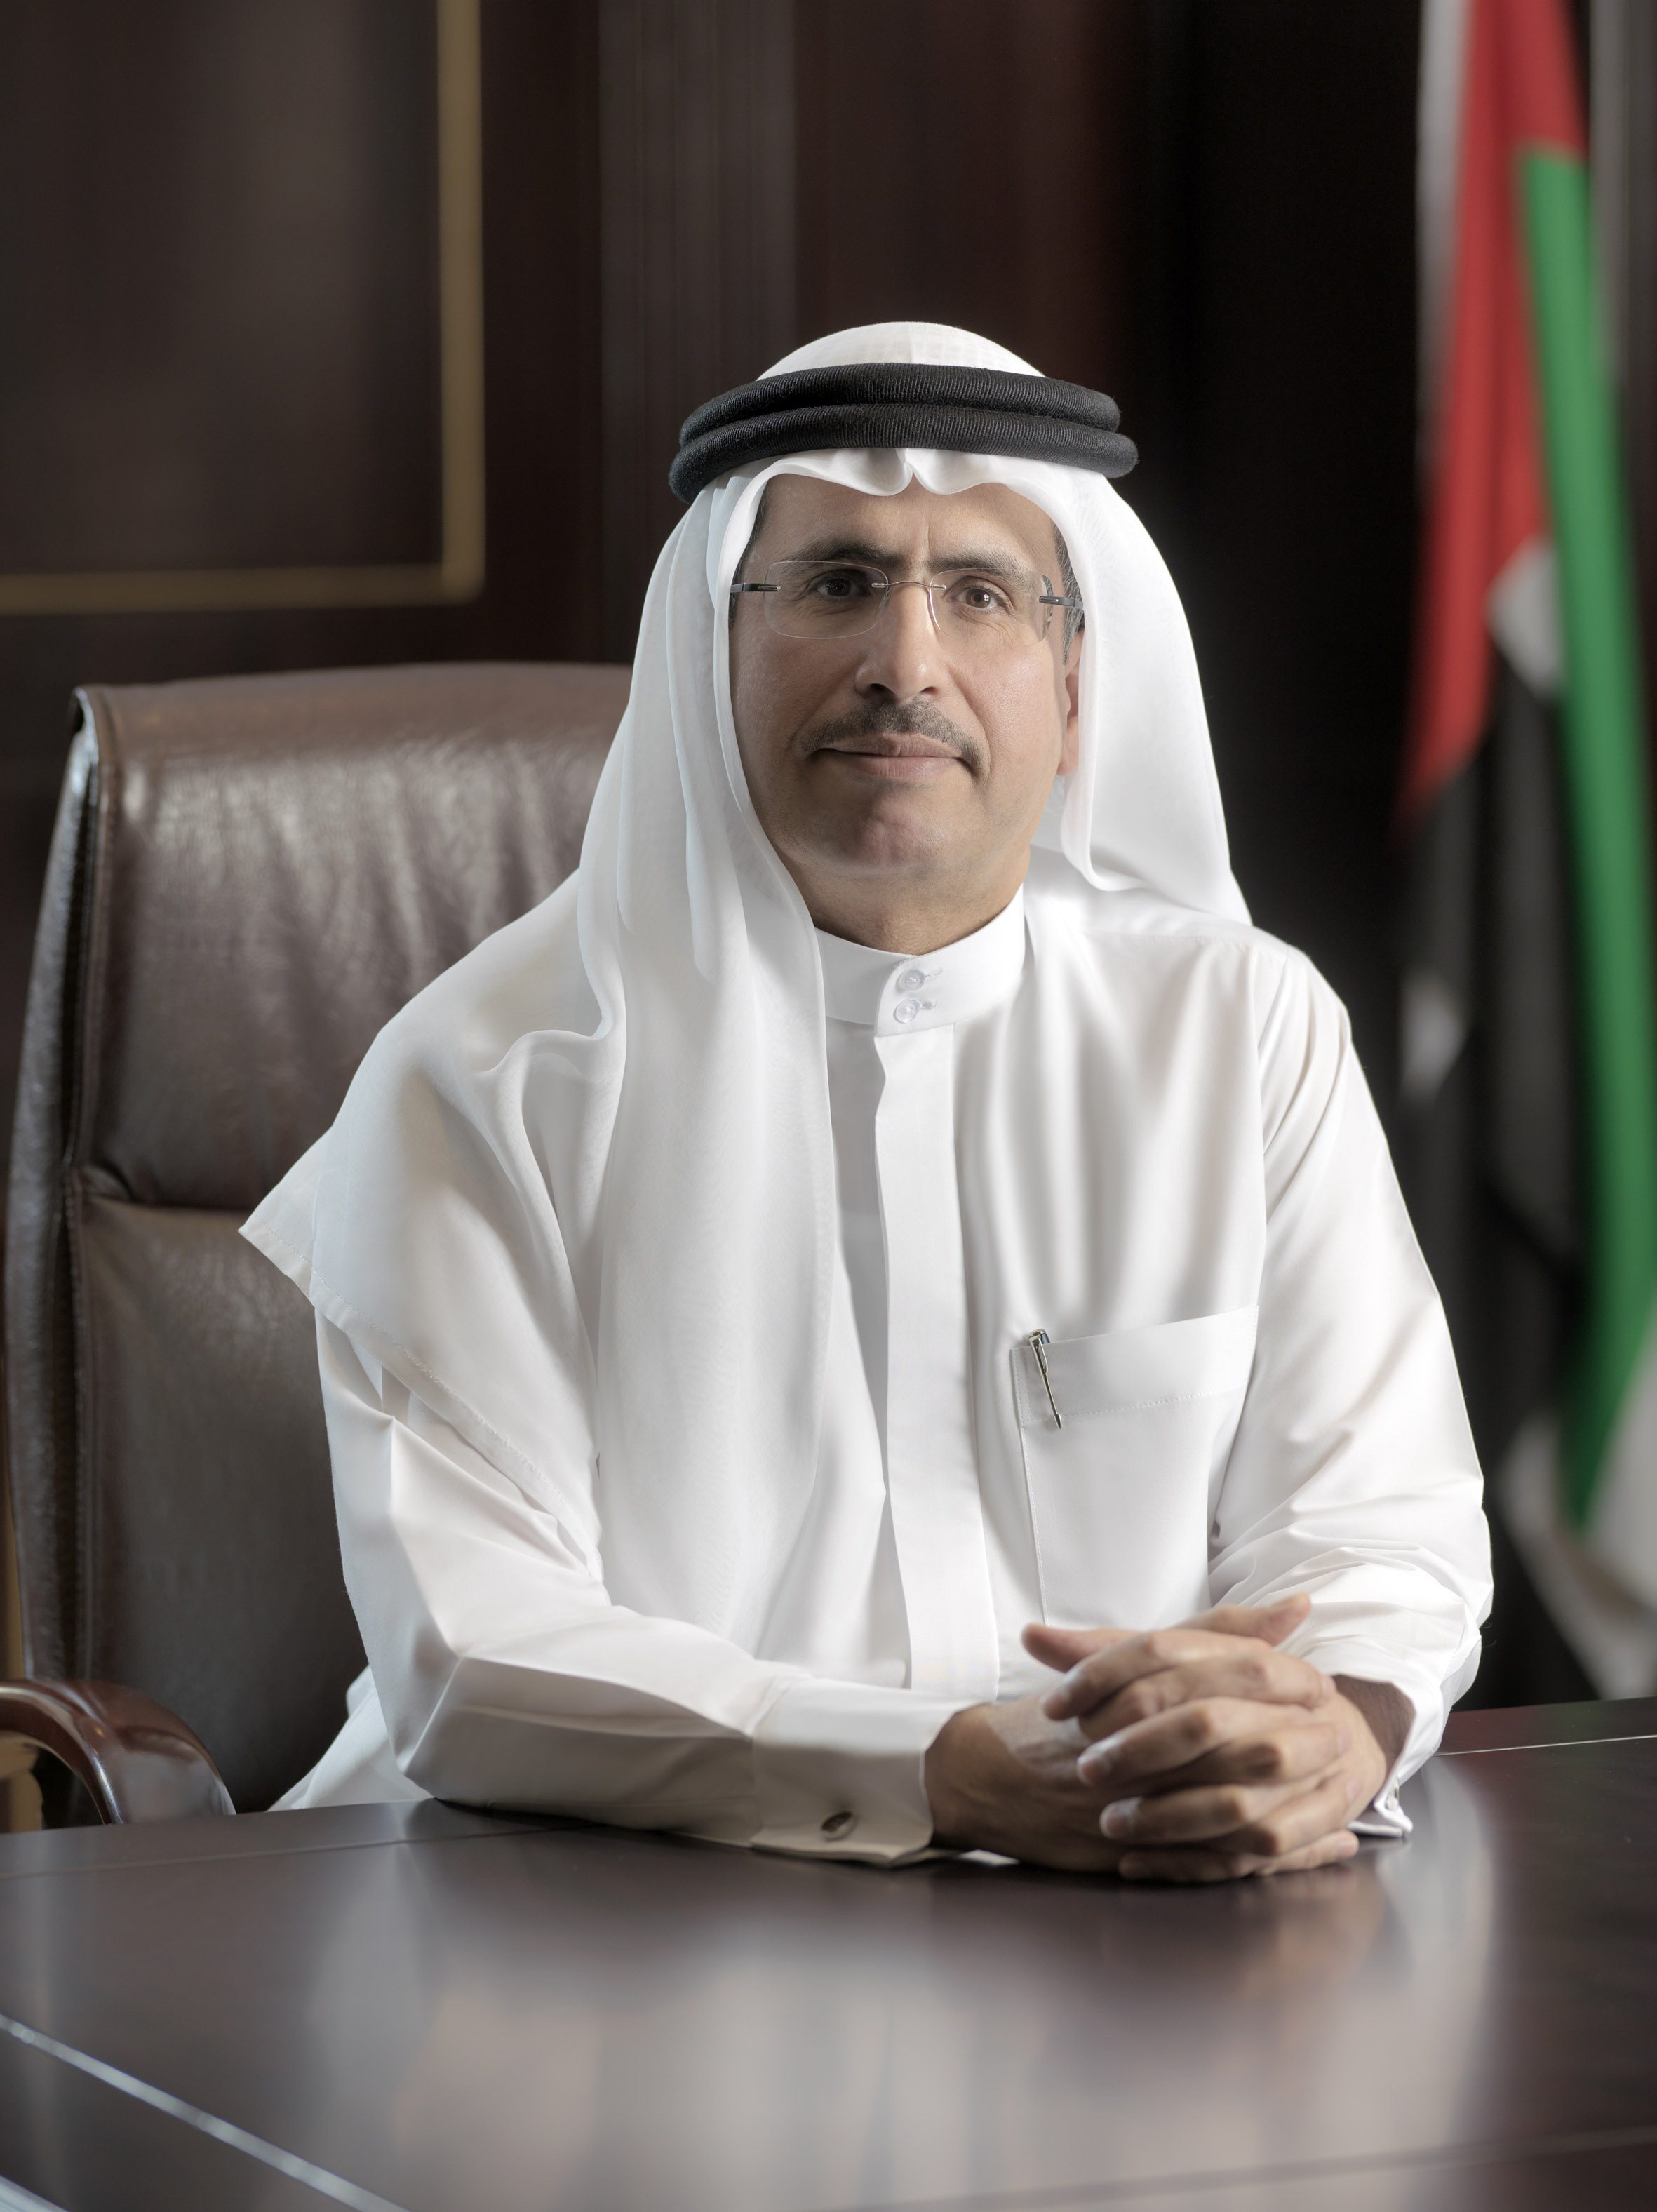 DEWA employees support its efforts in CSR and voluntary work